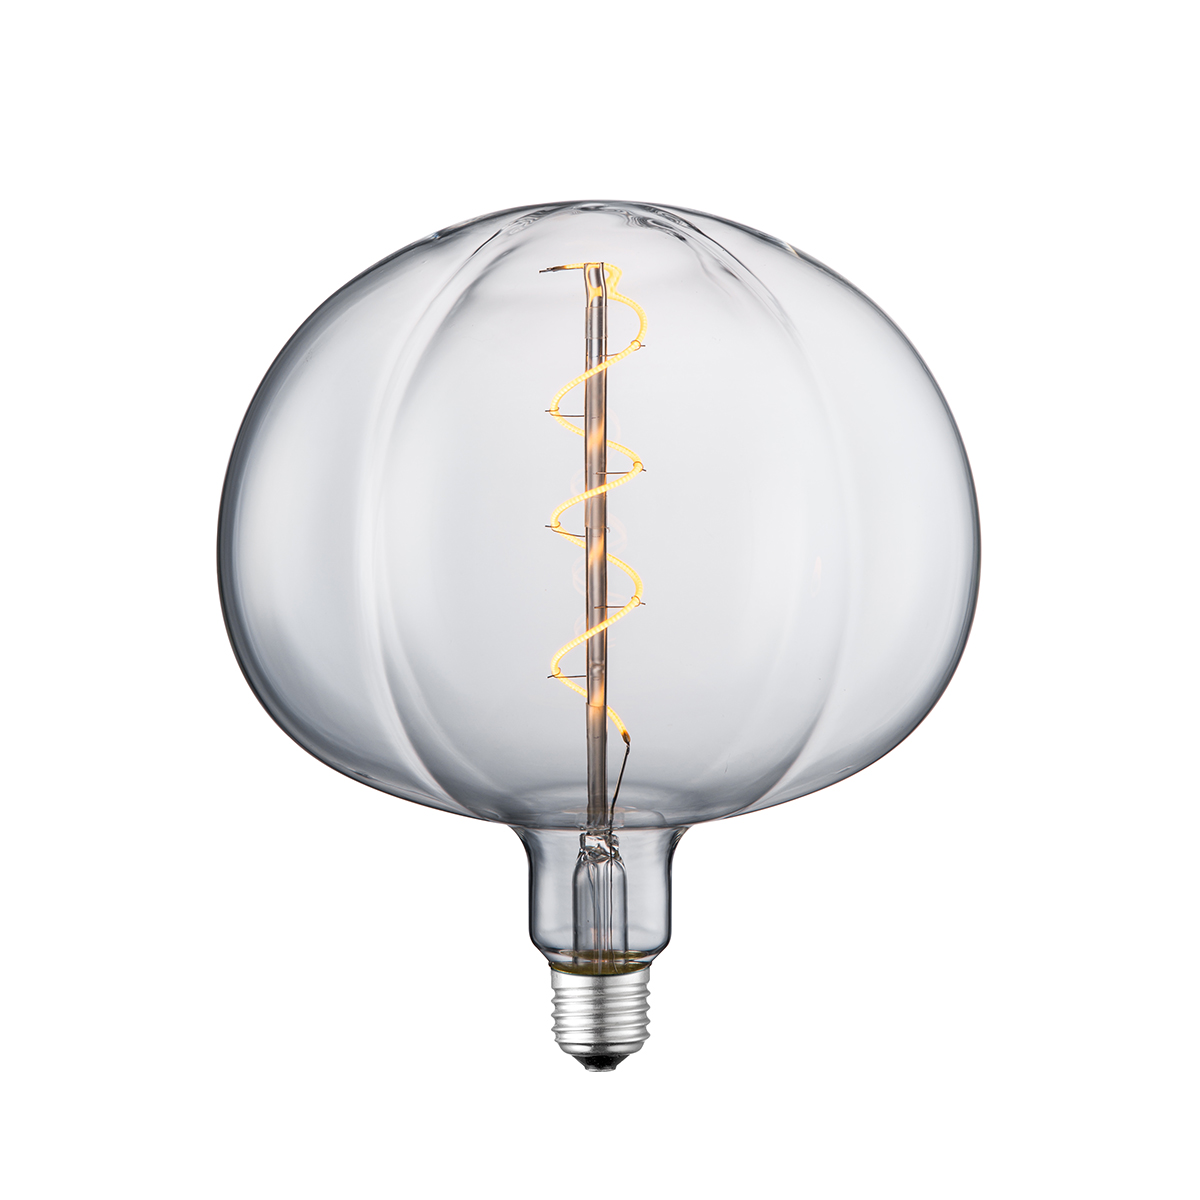 Tangla lighting - TLB-8106-04CL - LED Light Bulb Single Spiral filament - special 4W clear - buds - dimmable - E27